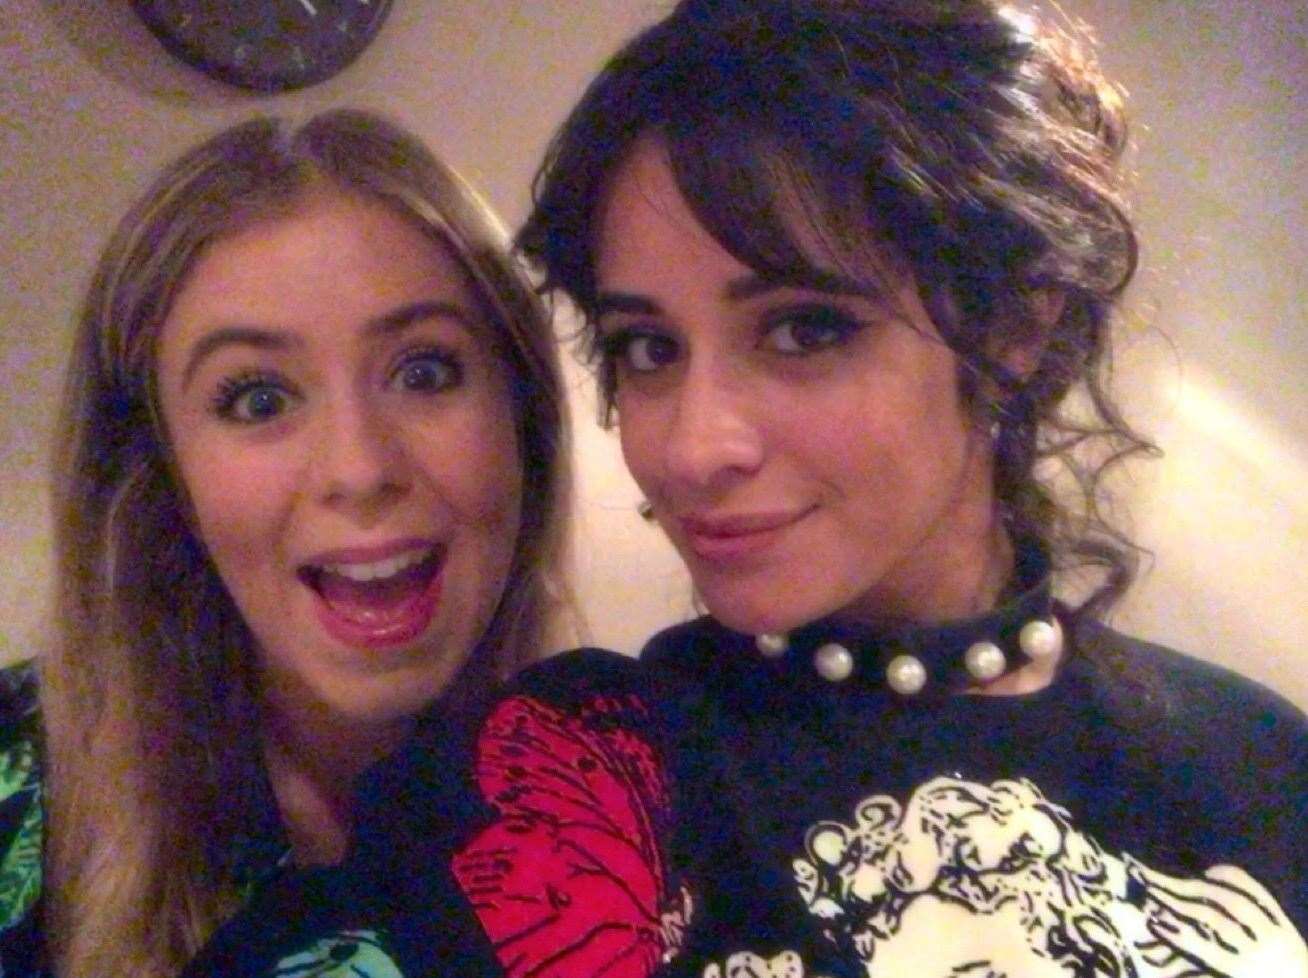 Laura from kmfm Breakfast with Camila Cabello